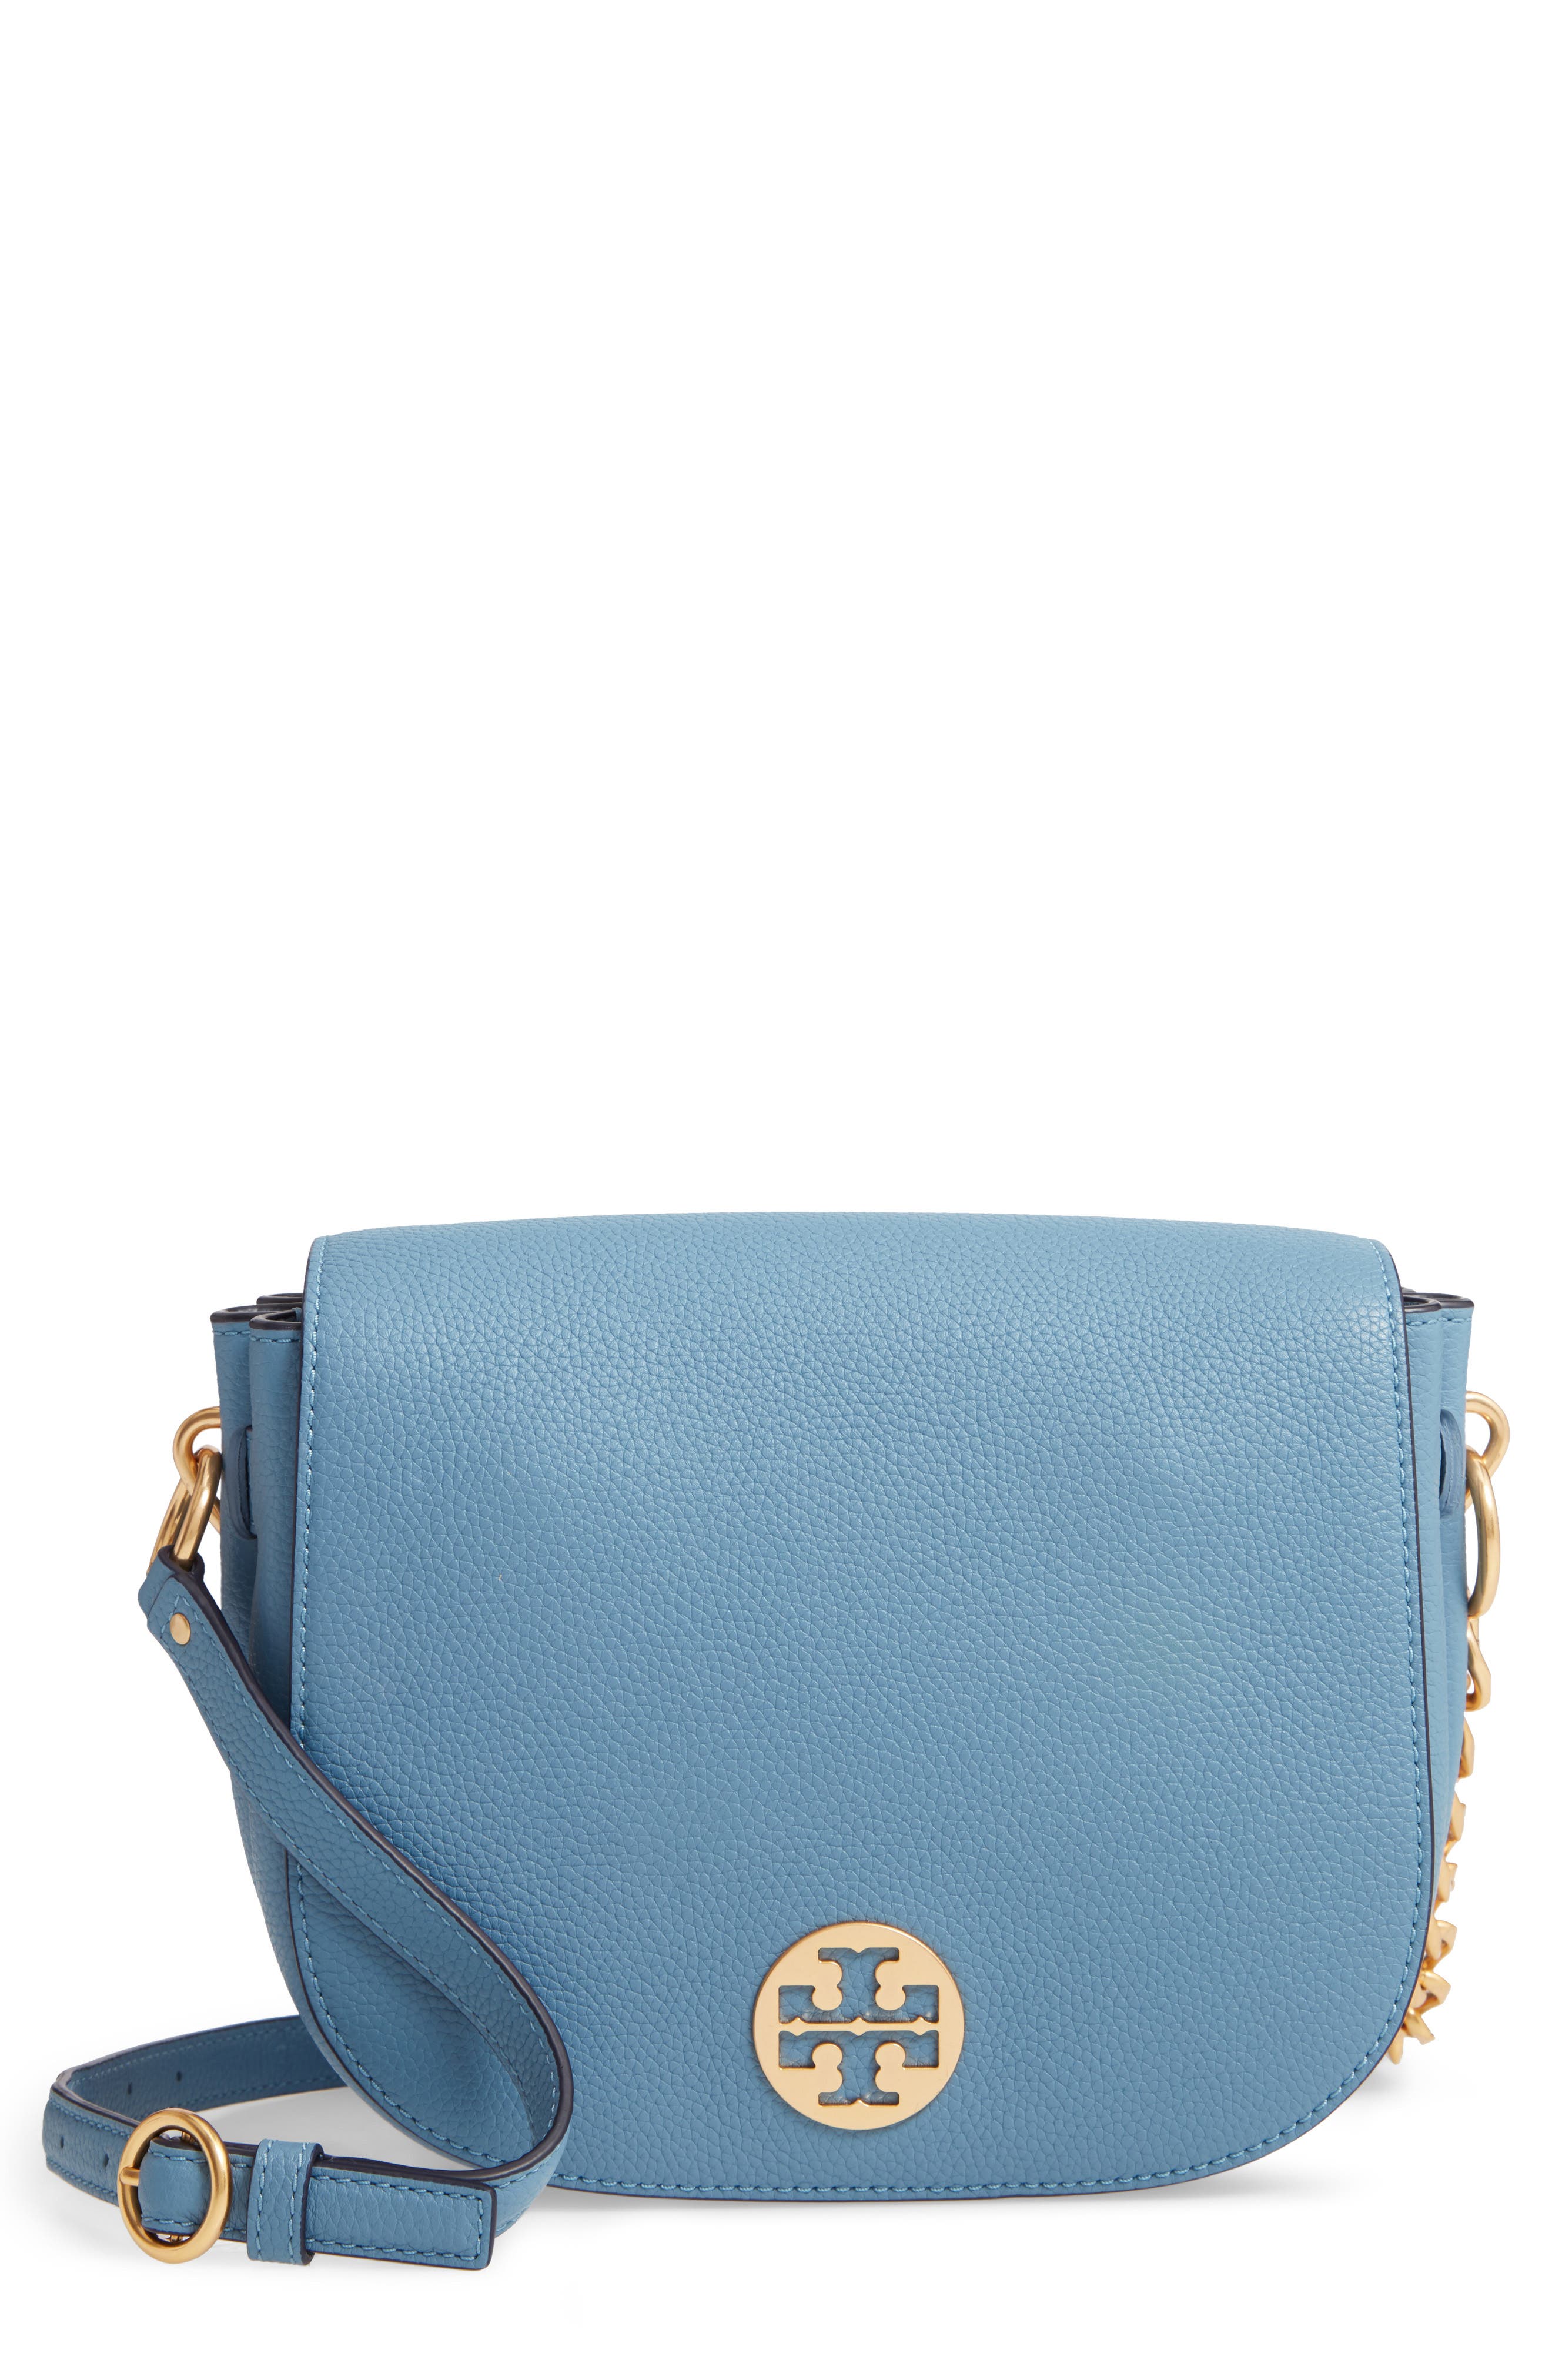 Tory Burch Everly Leather Flap Saddle 